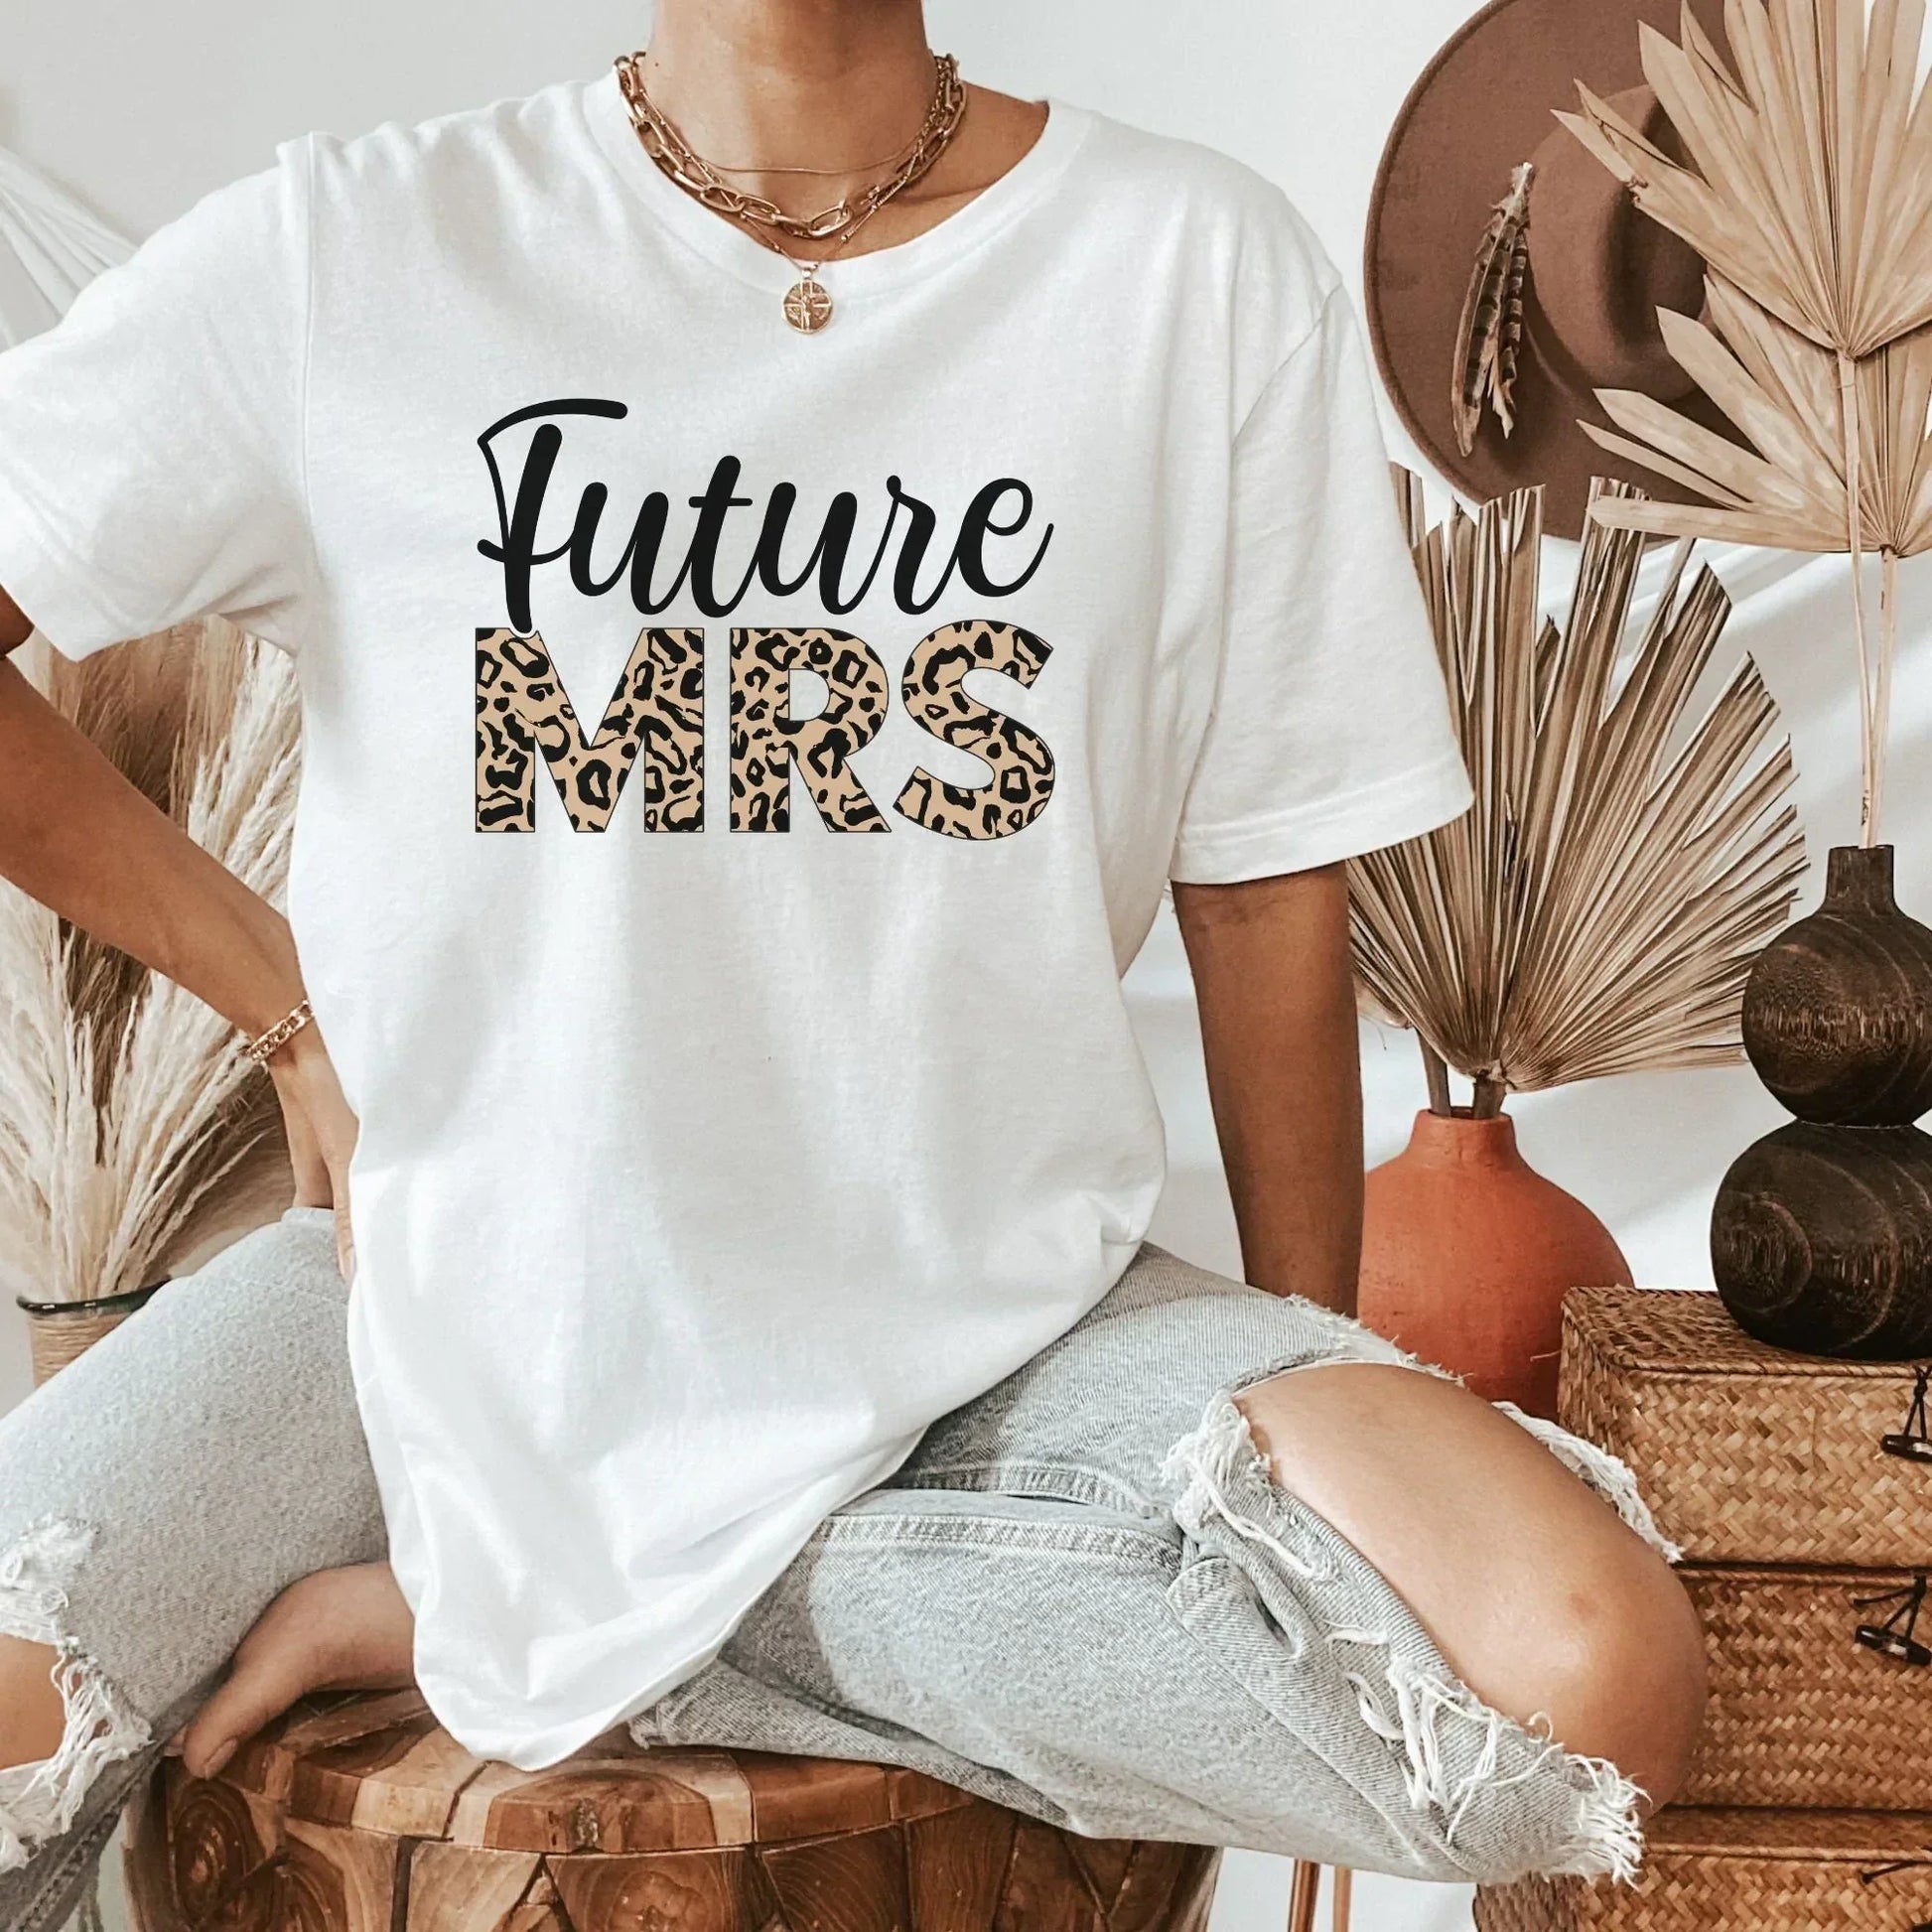 Future Mrs Sweatshirt, Wifey Sweater, Getting Ready Outfit, Team Bride shirt, Wife Hoodie, Gift for Bride to Be, Bride Sweatshirt